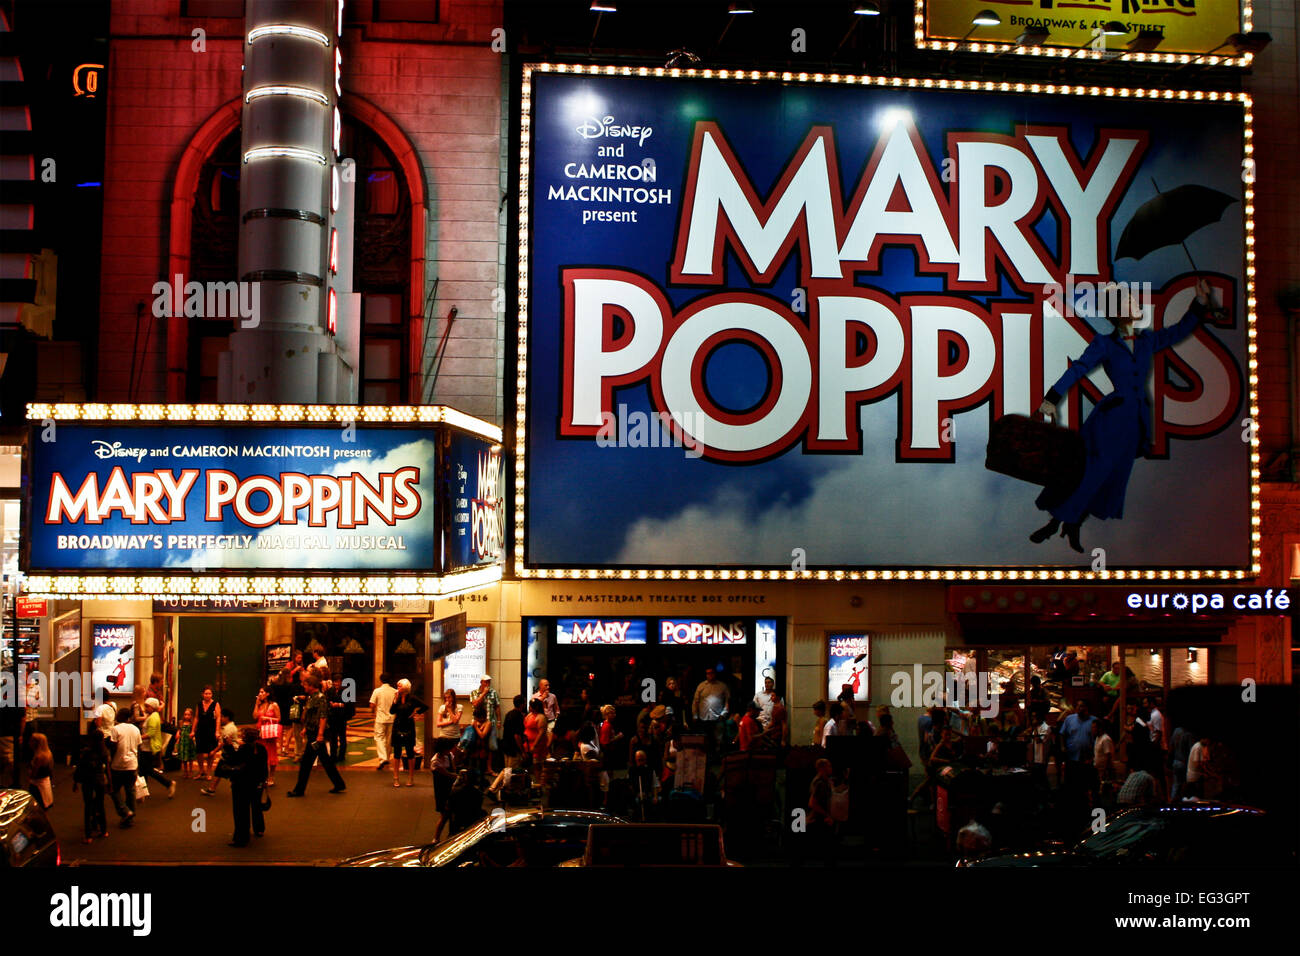 Mary Poppins Broadway billboards show at the New Amsterdam Theater, 42nd street, theater district by night. Times Square. New York City, NYC, NY, USA Stock Photo